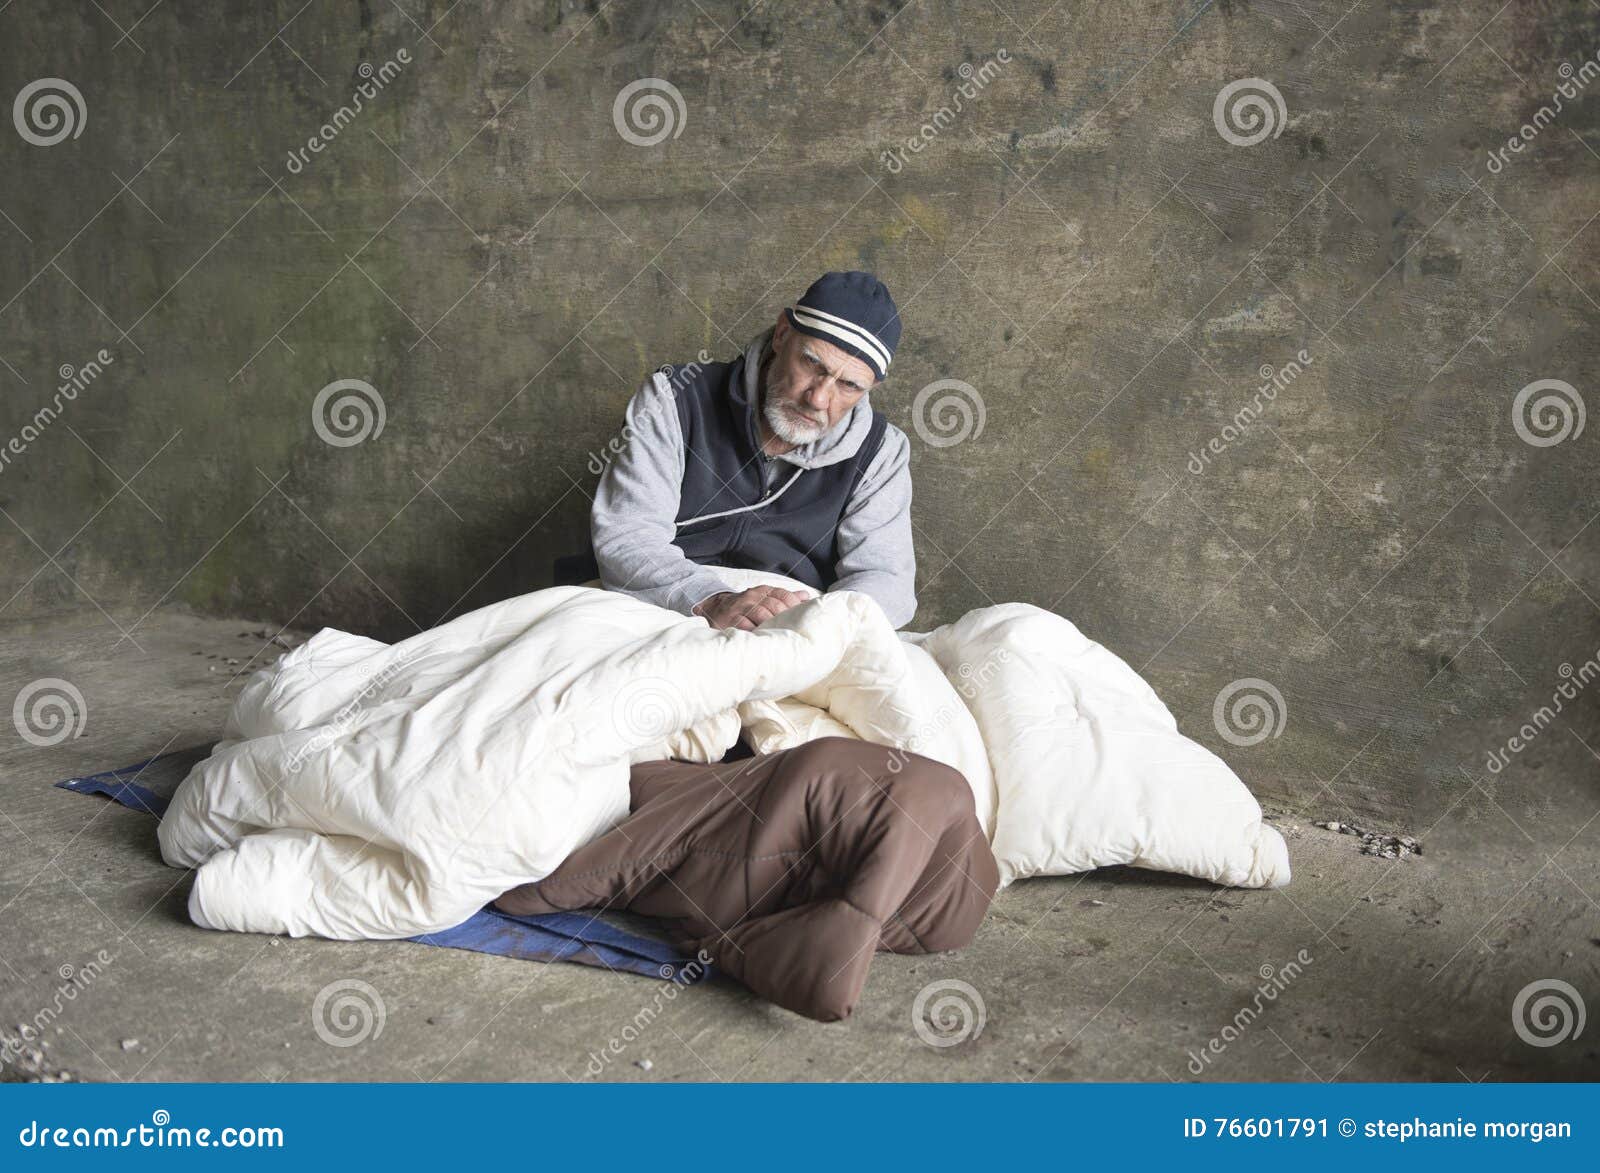 Mature Homeless Man Sitting In Old Blankets Outdoors Stock Image Image Of Sleeping